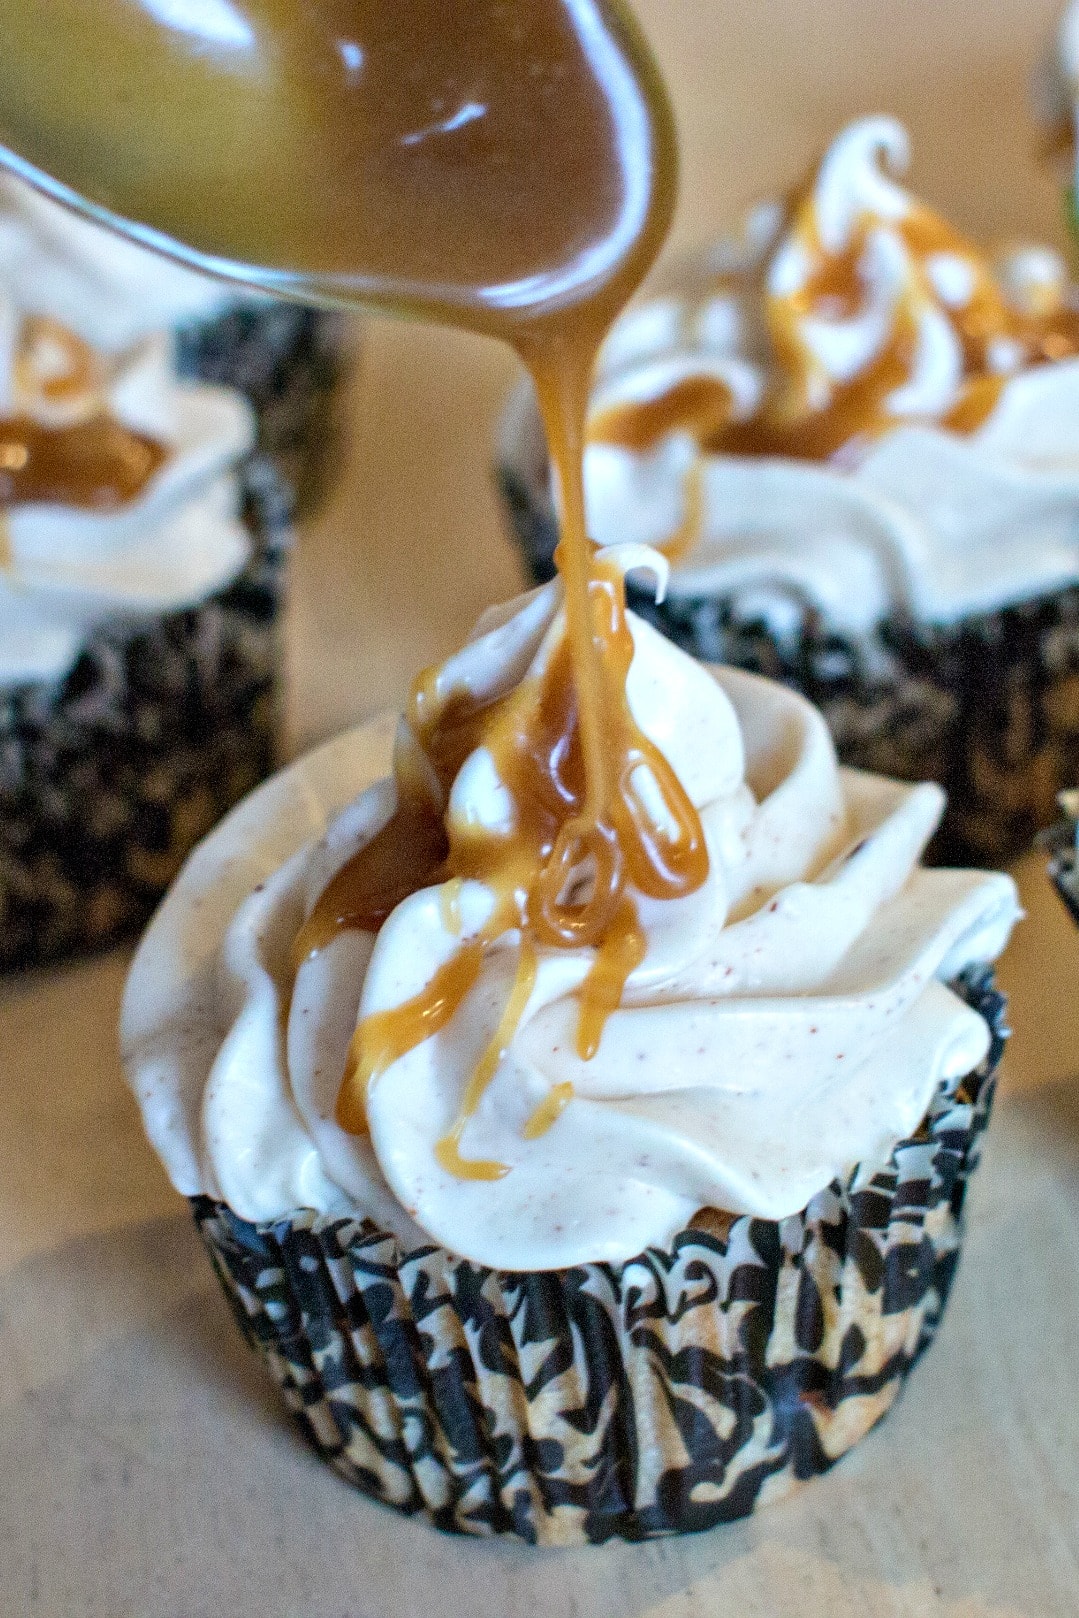 Drizzling Caramel sauce on apple spice cupcakes